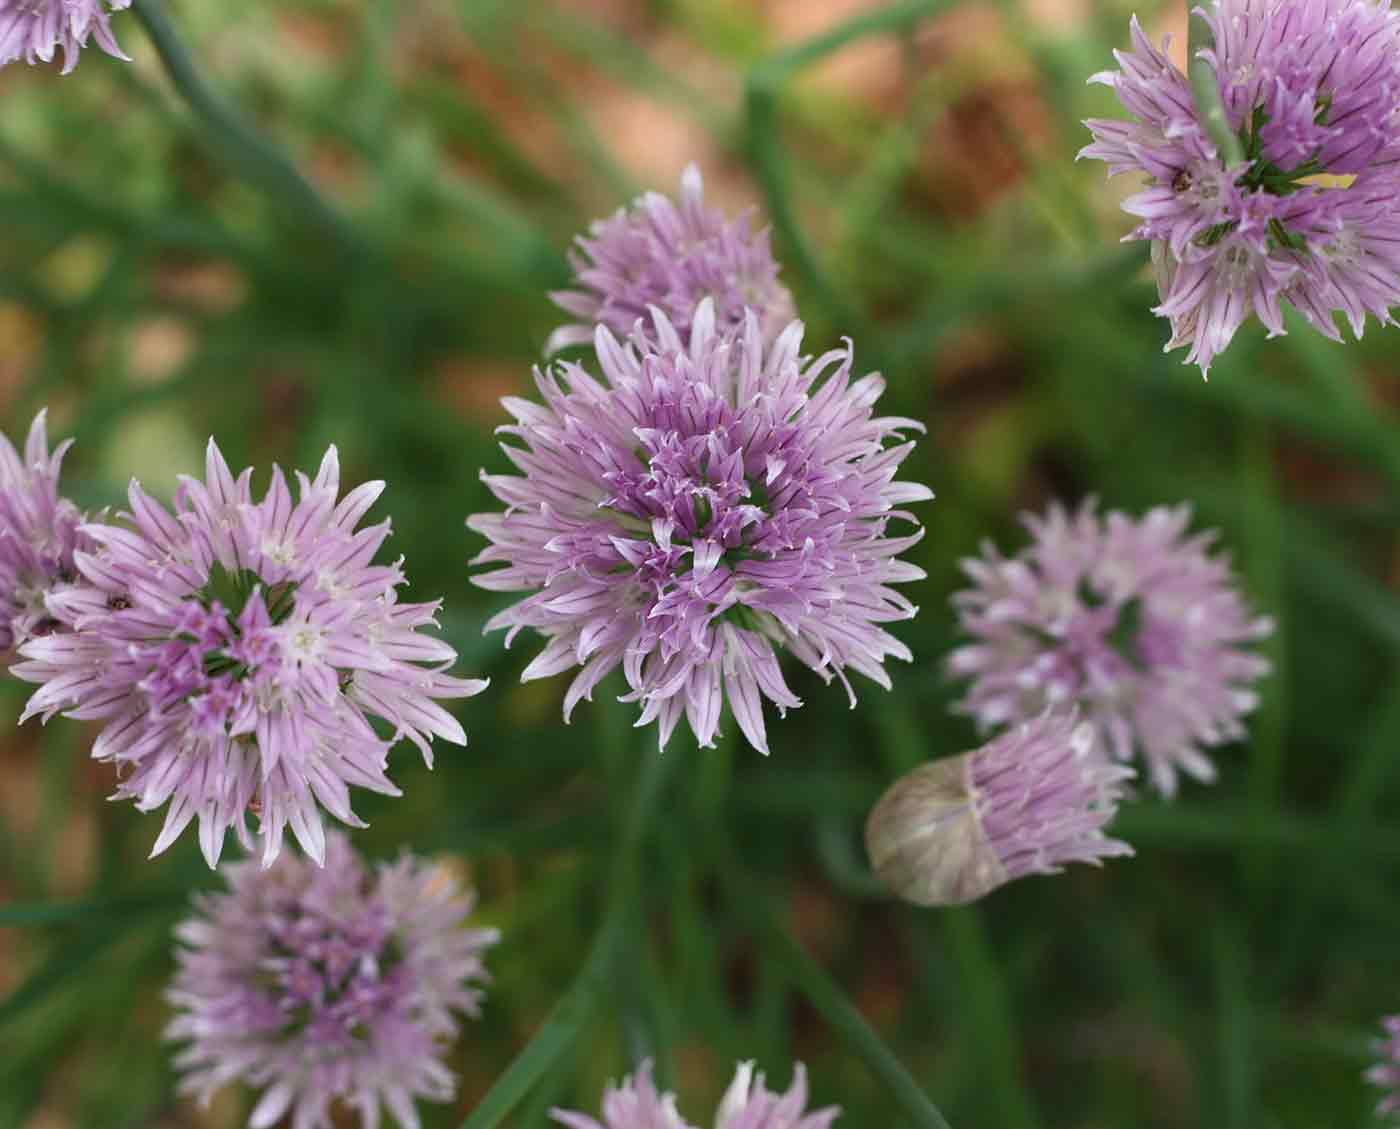 View of chive flowers in bloom from above.